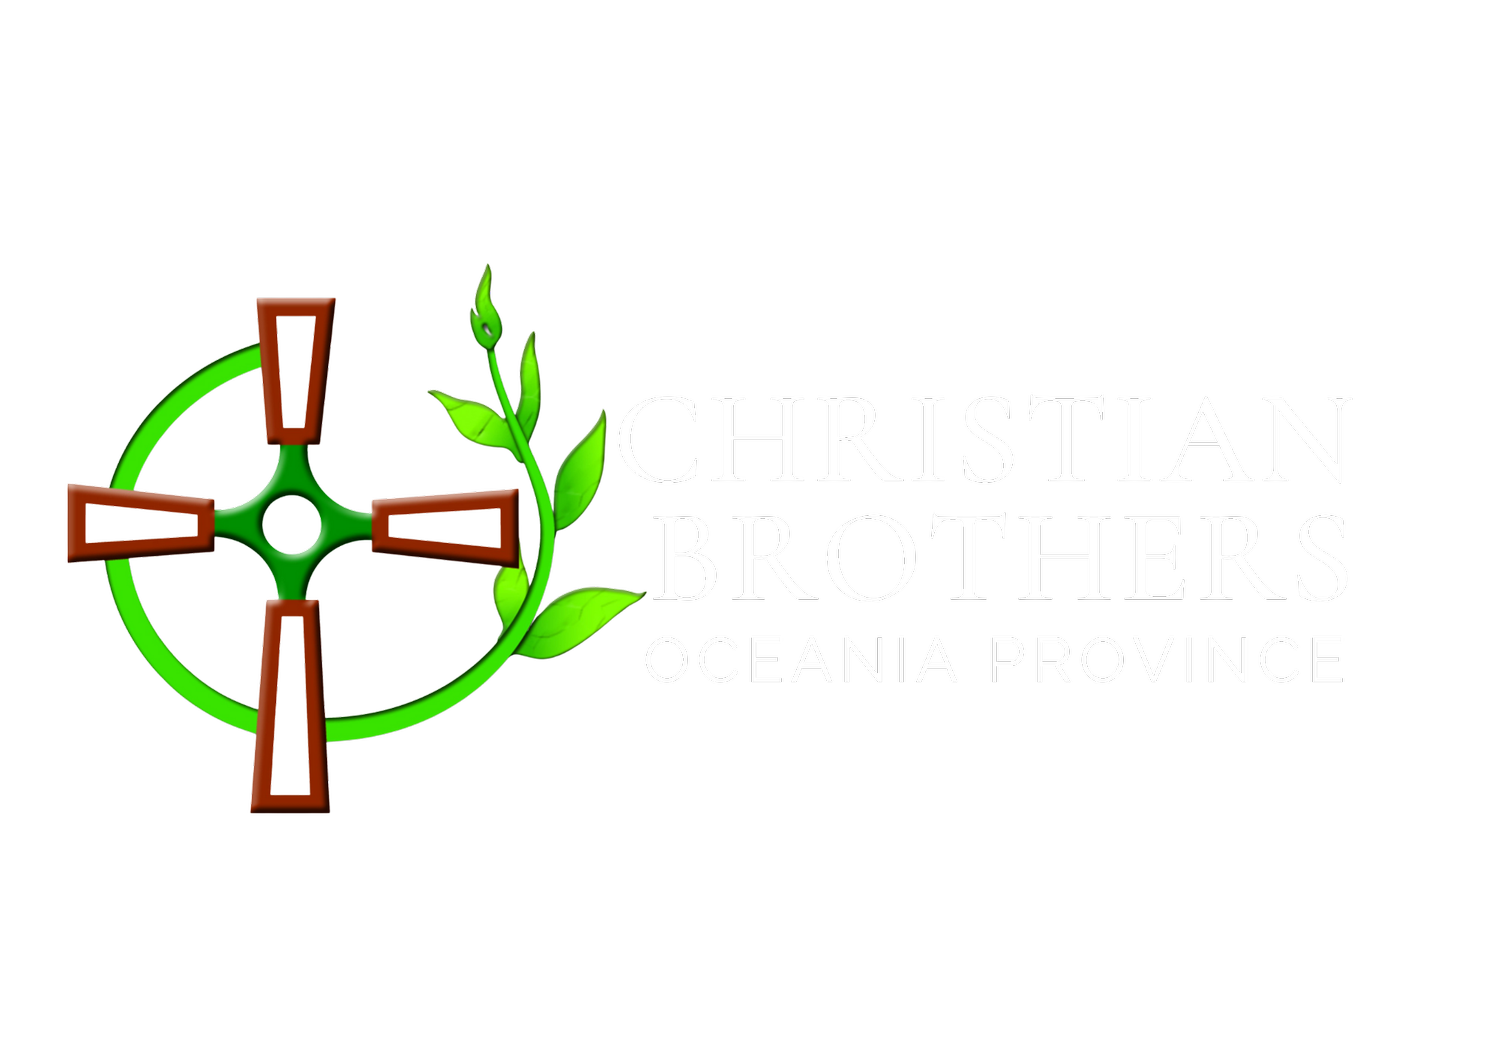 Edmund Rice Christian Brothers Oceania Province